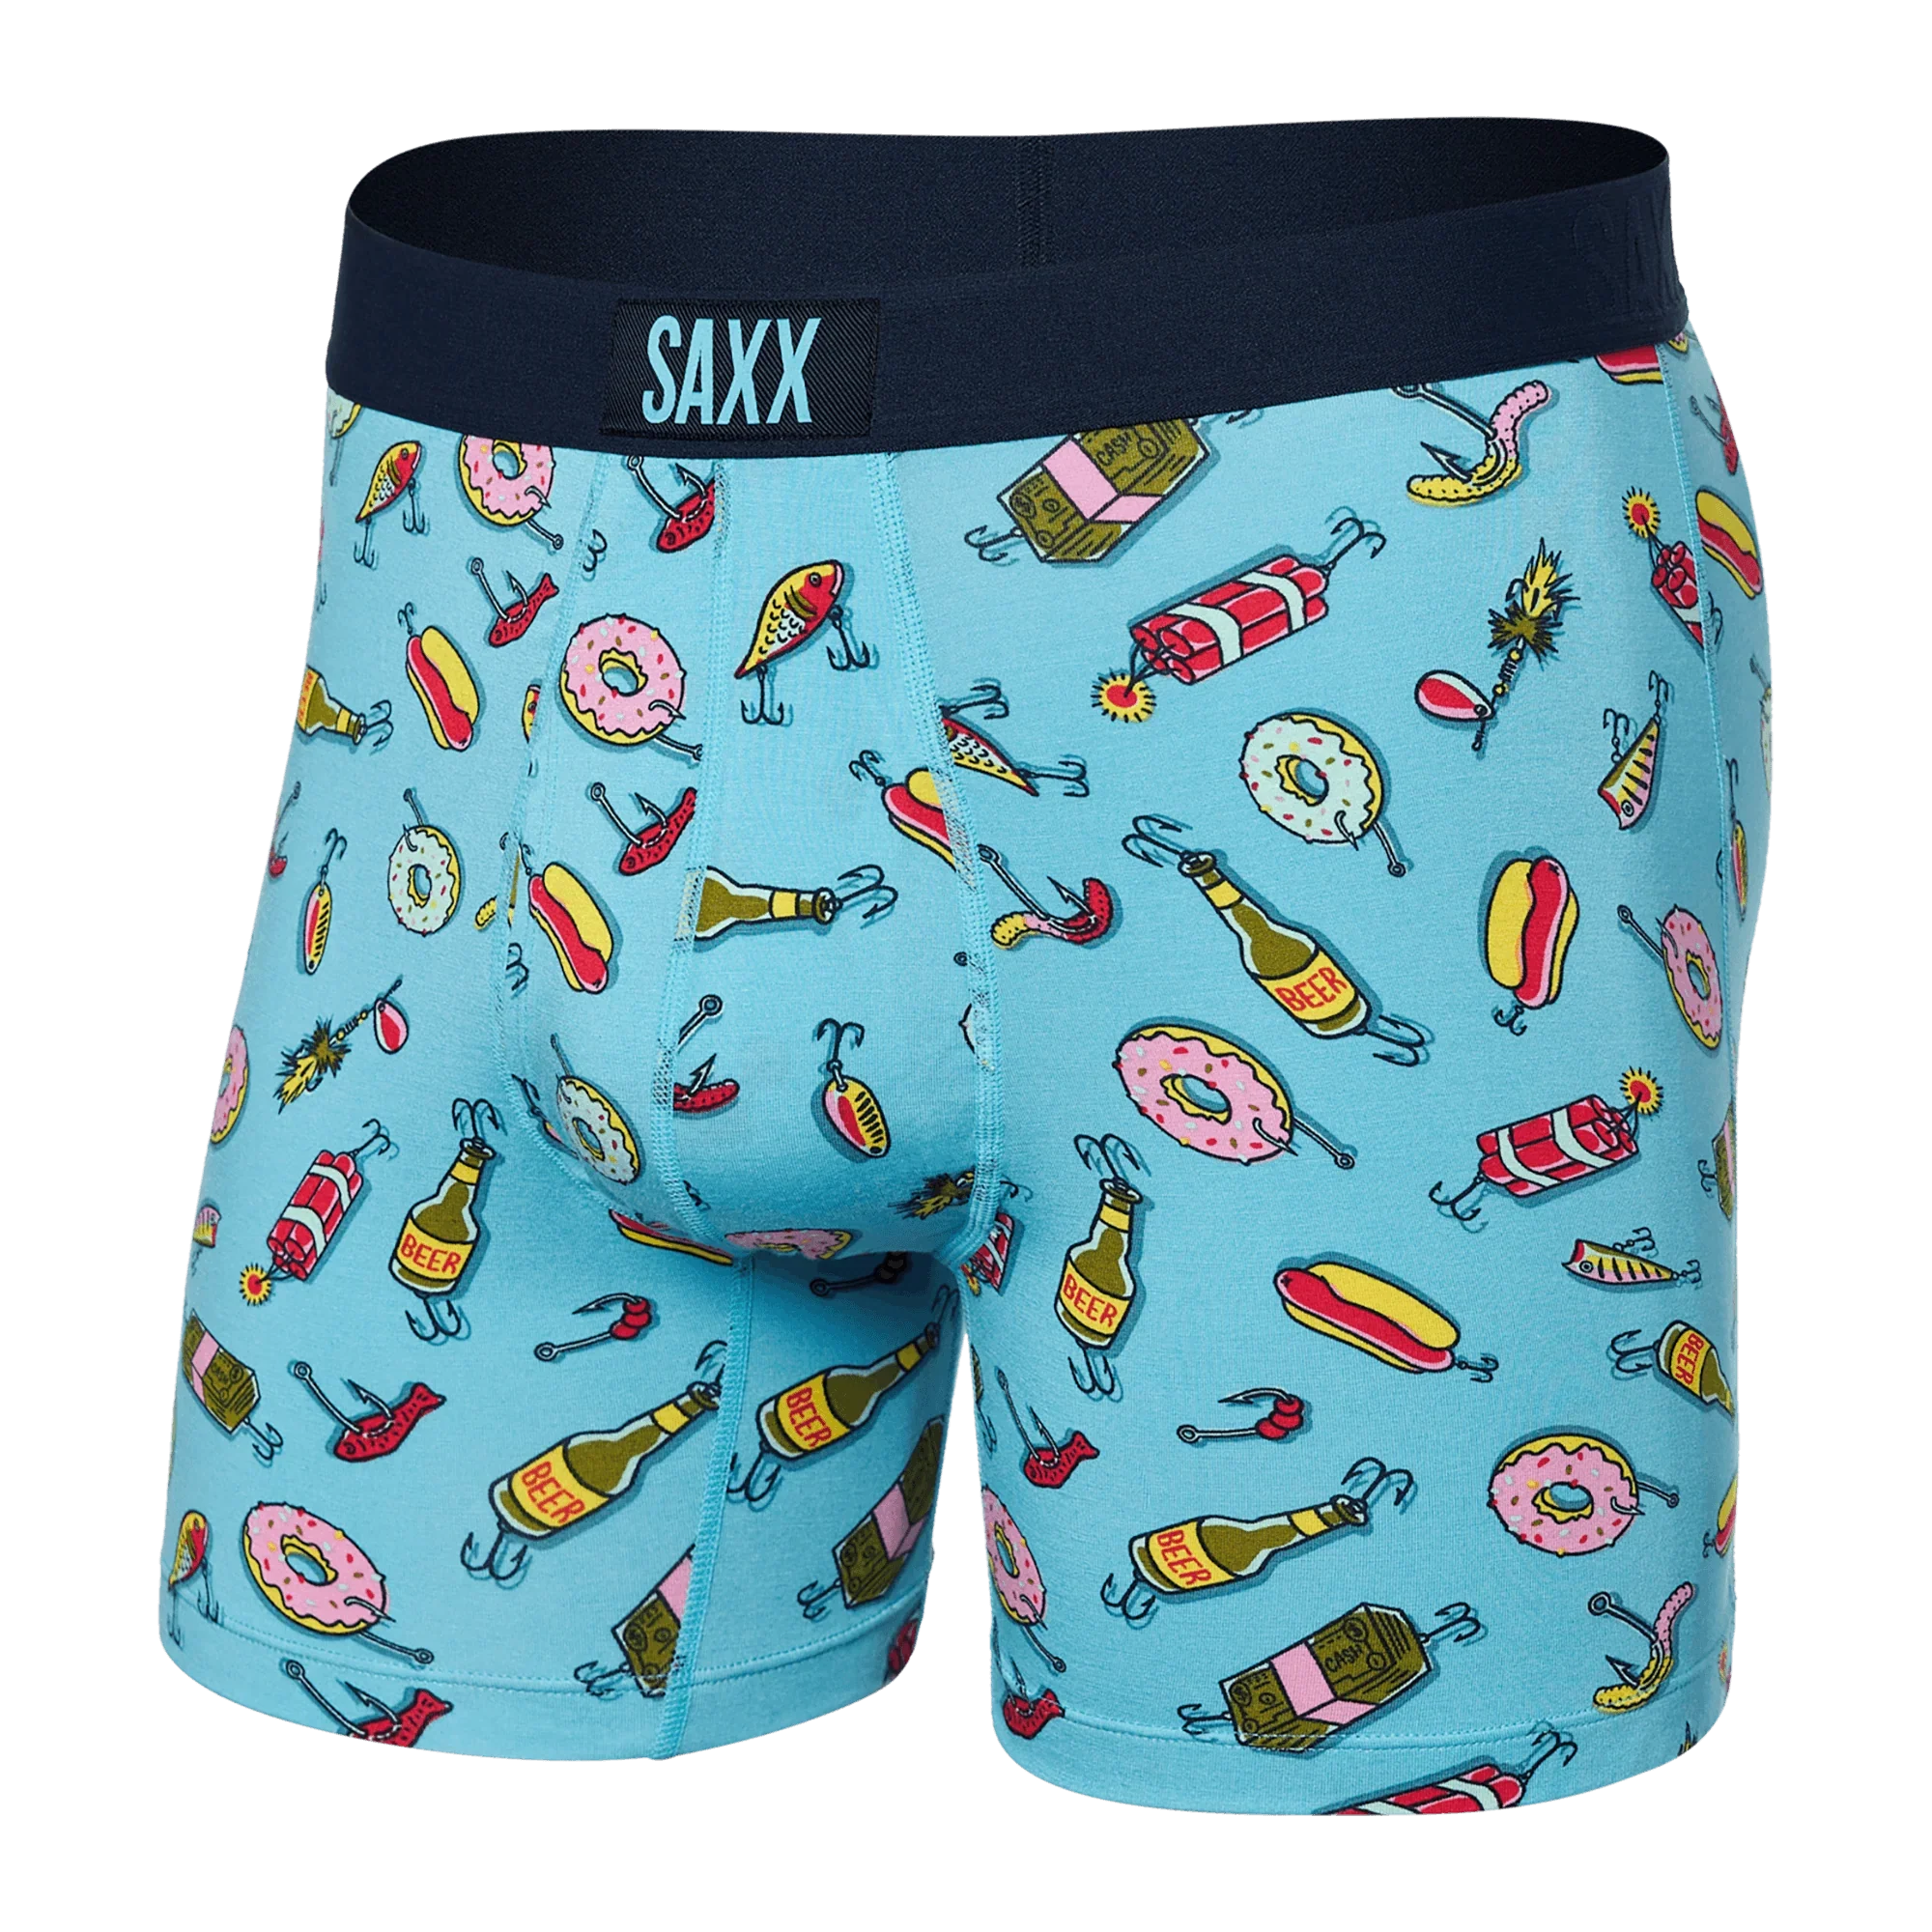 'SAXX Ultra Super Soft Boxer Brief - I'll Try Anything' in 'Maui' colour